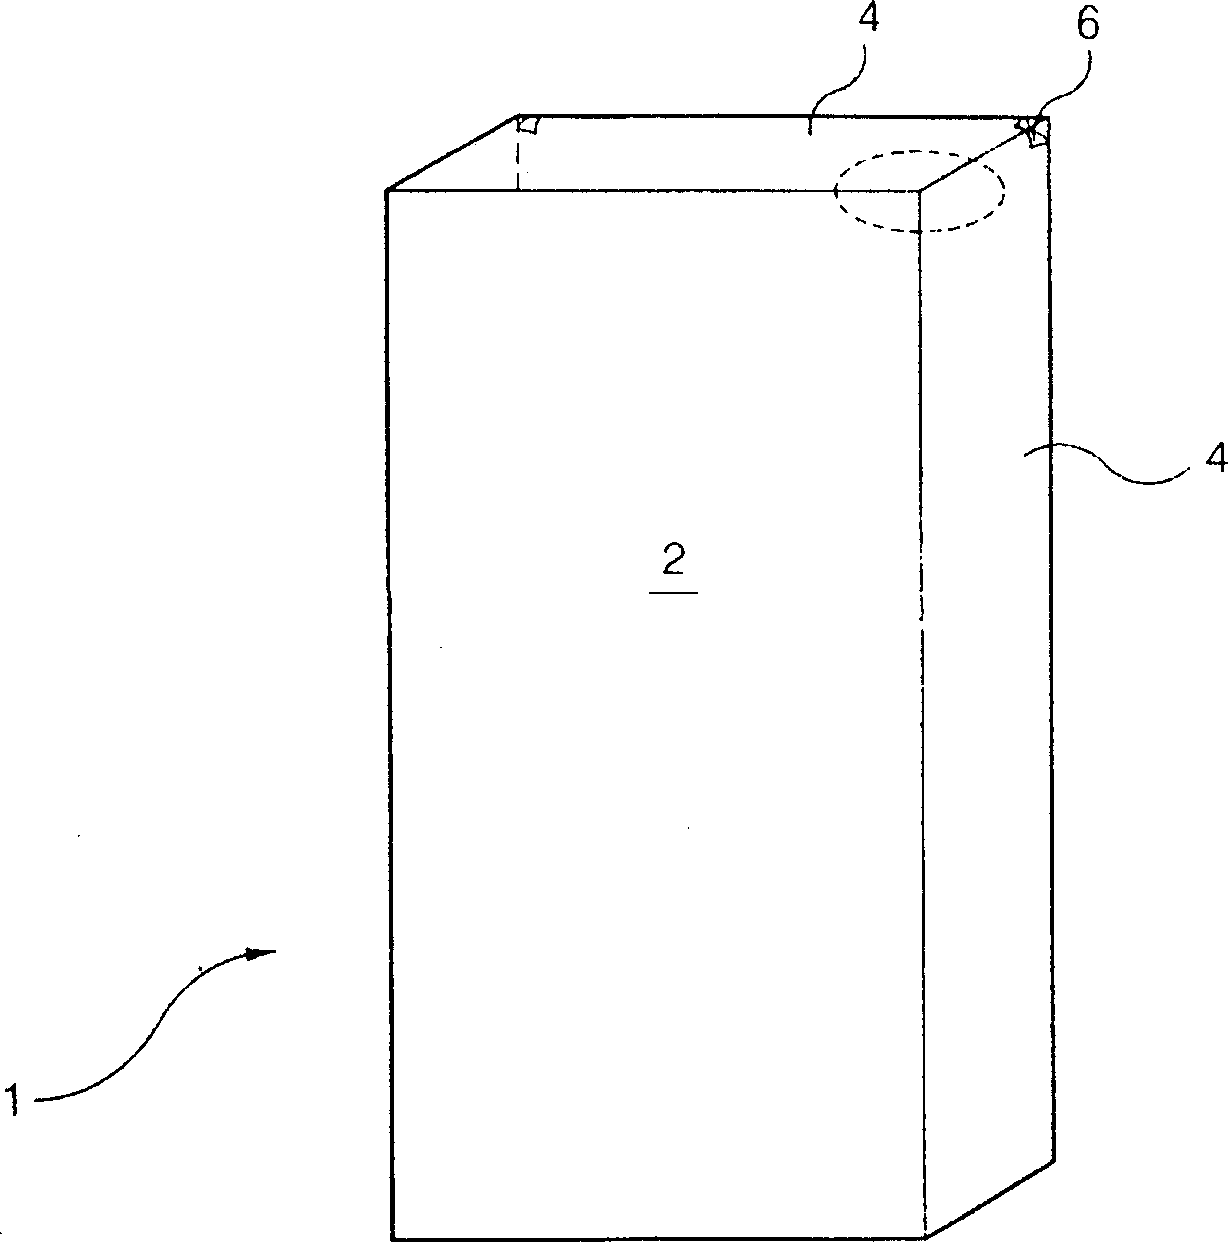 External faced board structure for door of refrigerator